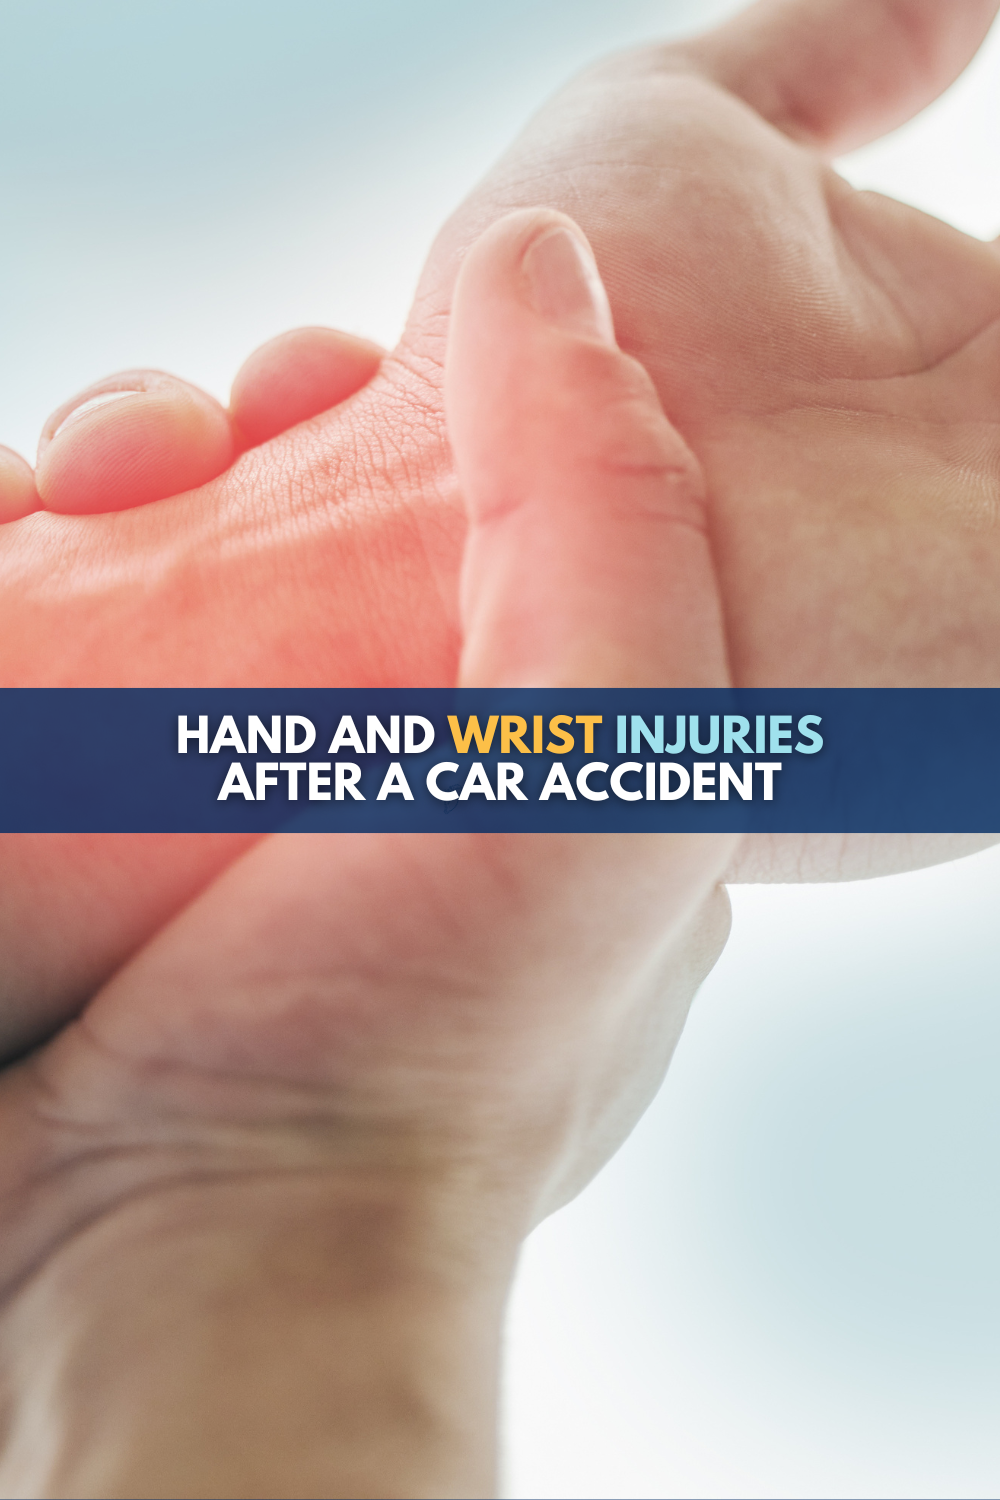 Hand and Wrist Injuries After a Car Accident